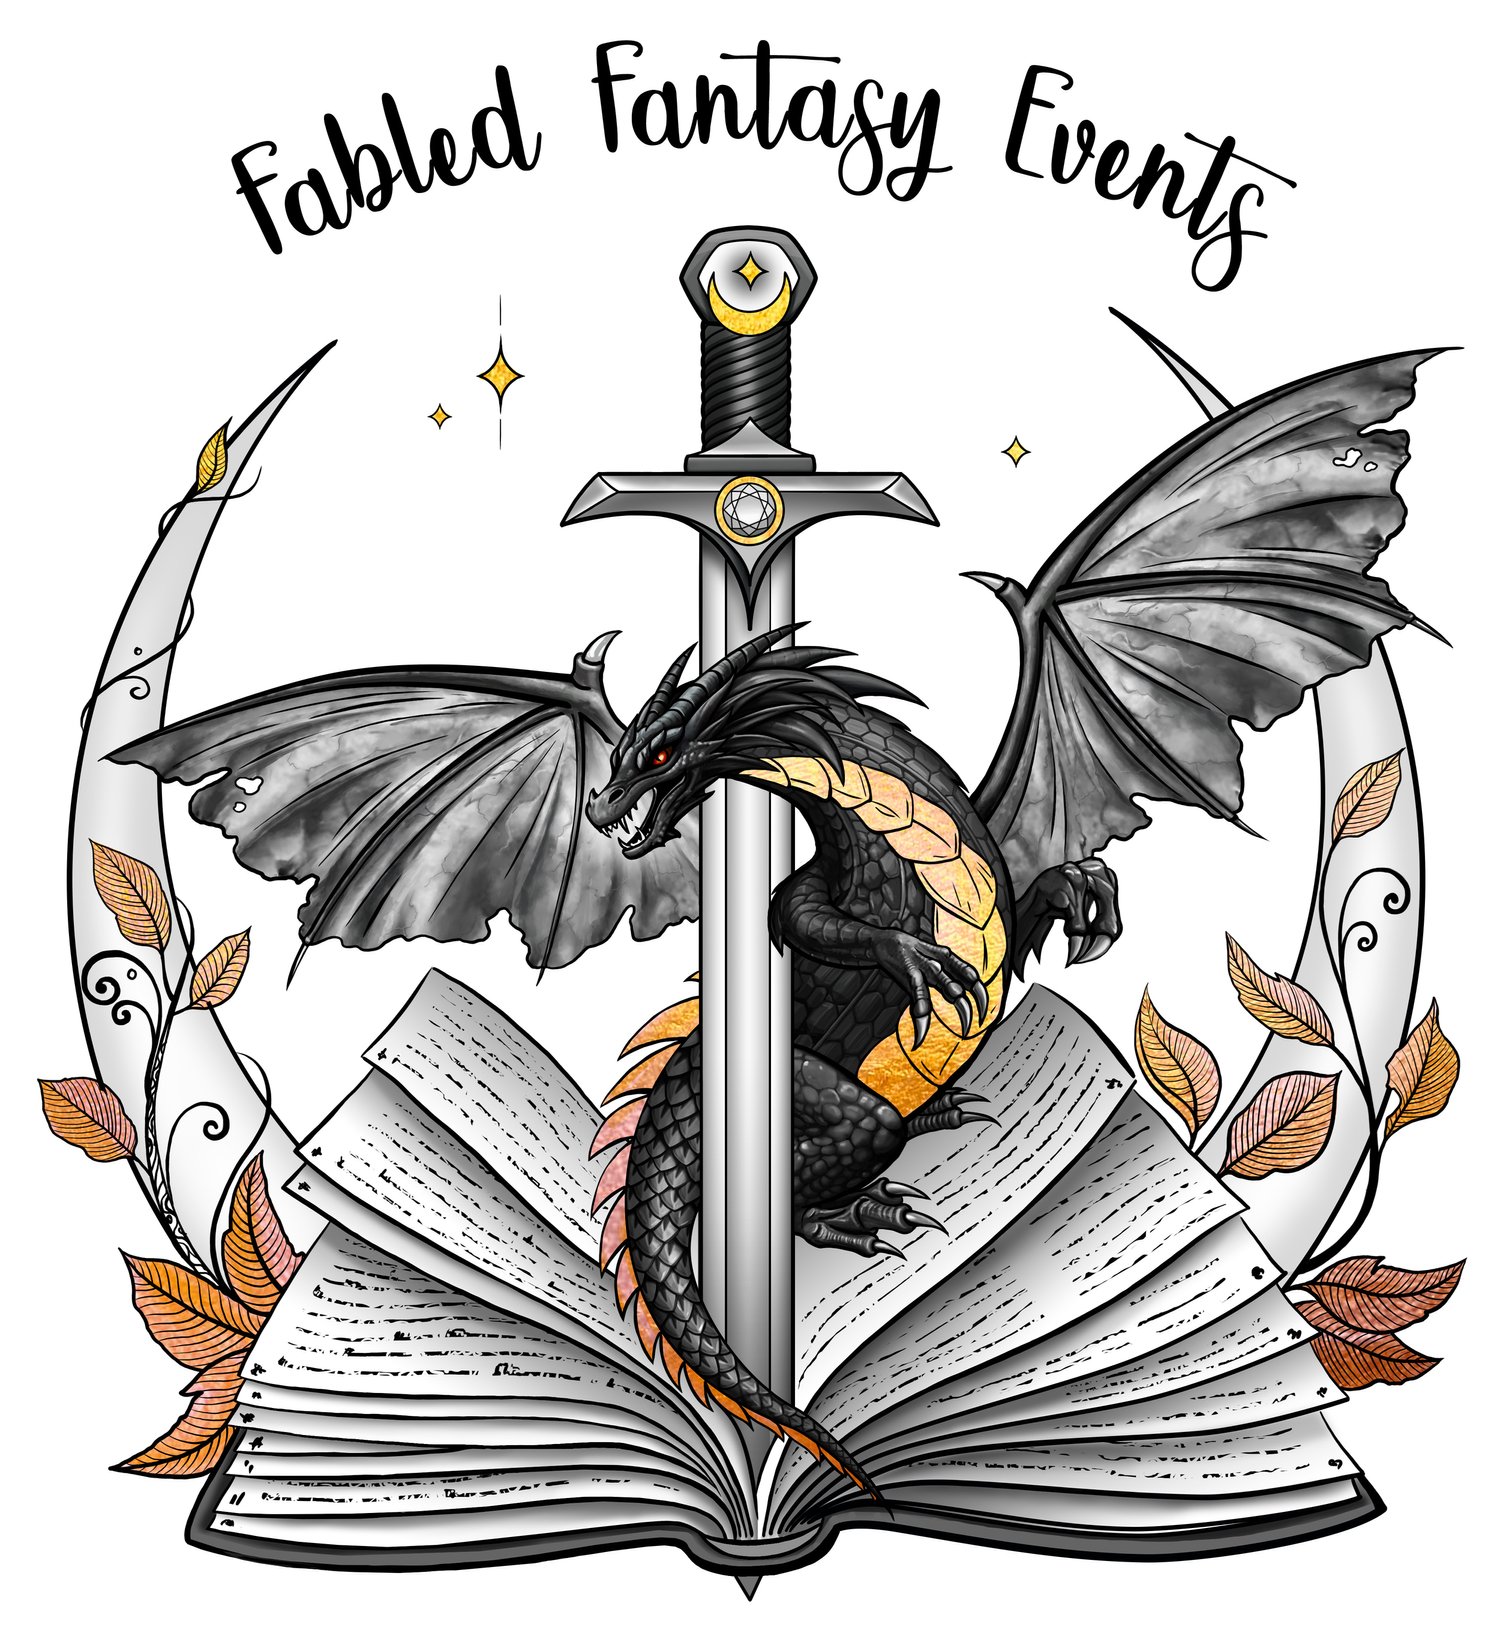 Fabled Fantasy Events